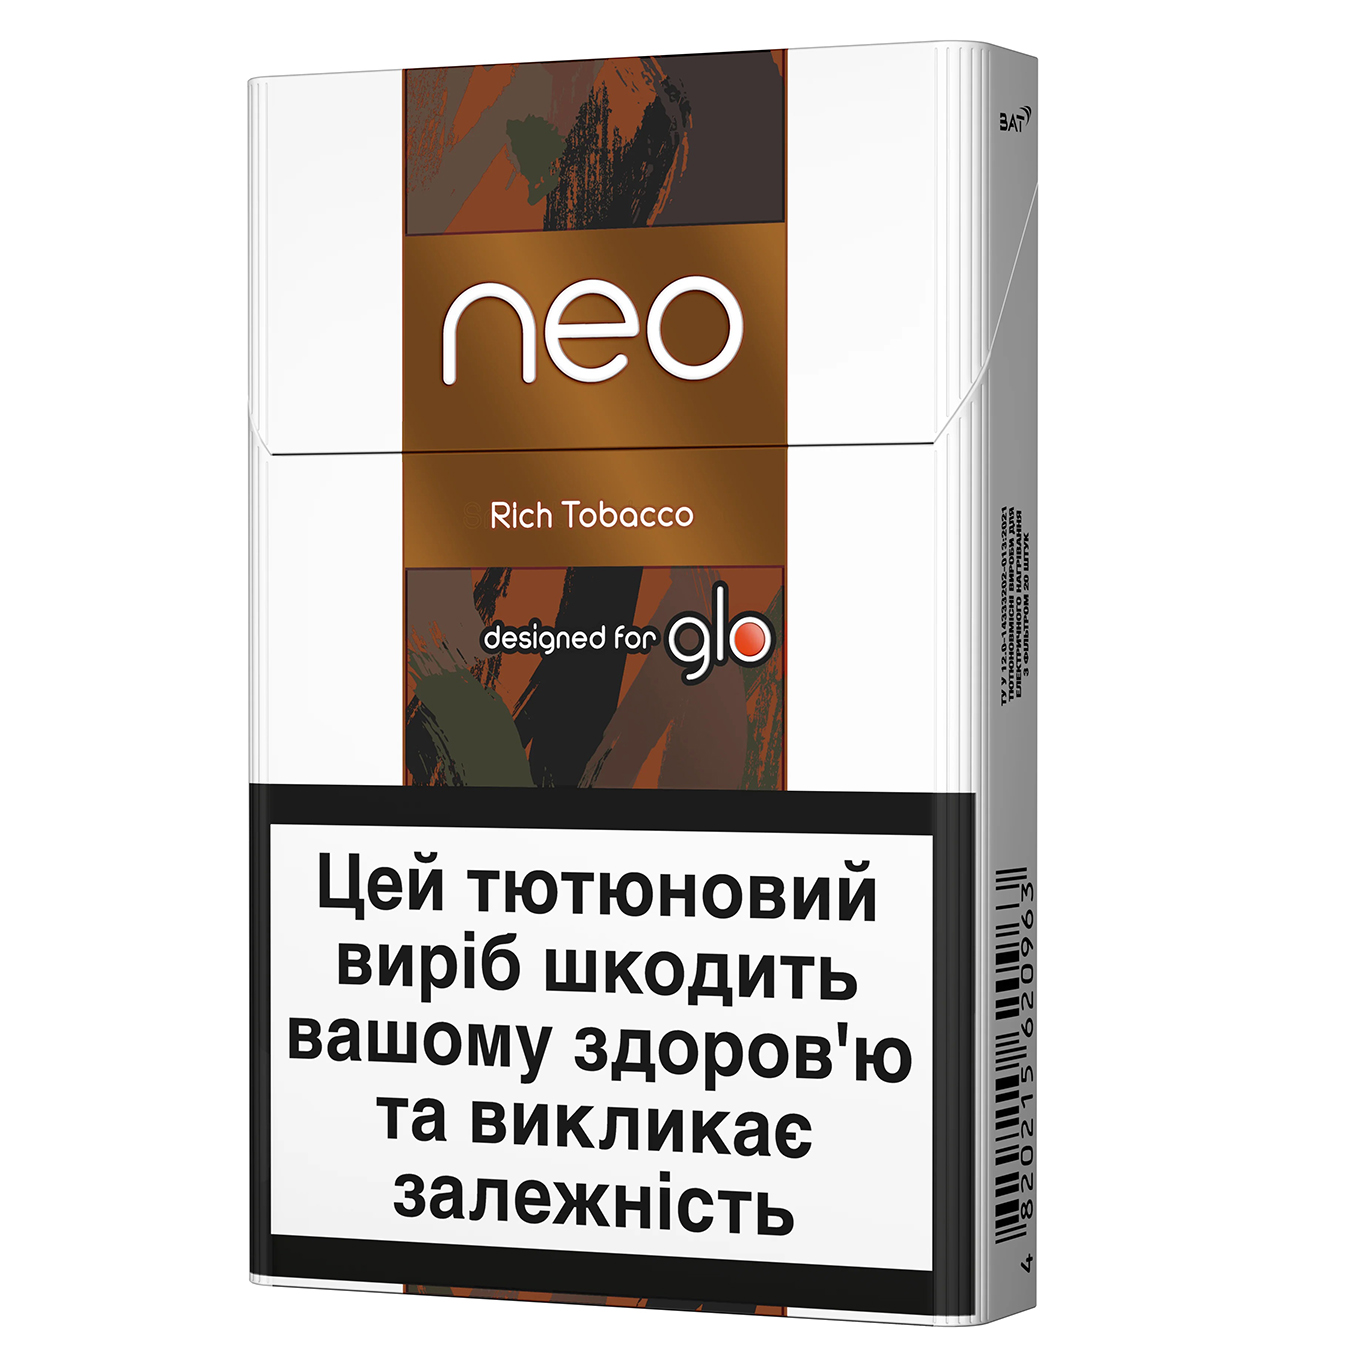 Kent Neo Rich Tobacco Sticks 20 pcs (the price is indicated without excise tax)